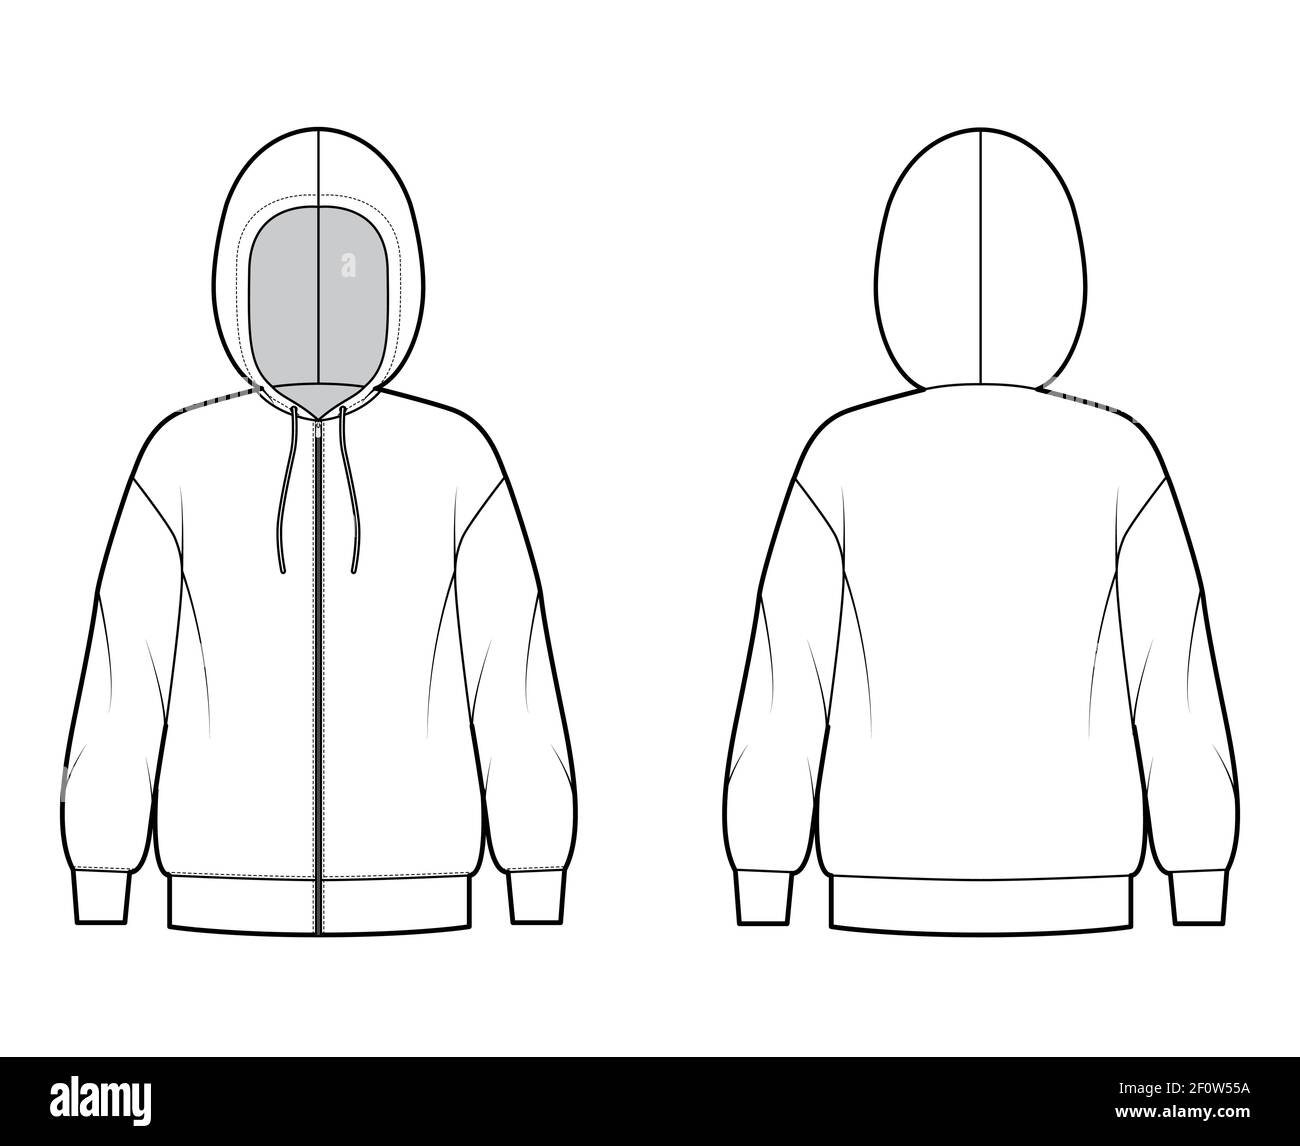 Zip-up Hoody sweatshirt technical fashion illustration with long sleeves, oversized body, drawstring. Flat extra large apparel template front, back, white color style. Women, men, unisex CAD mockup Stock Vector